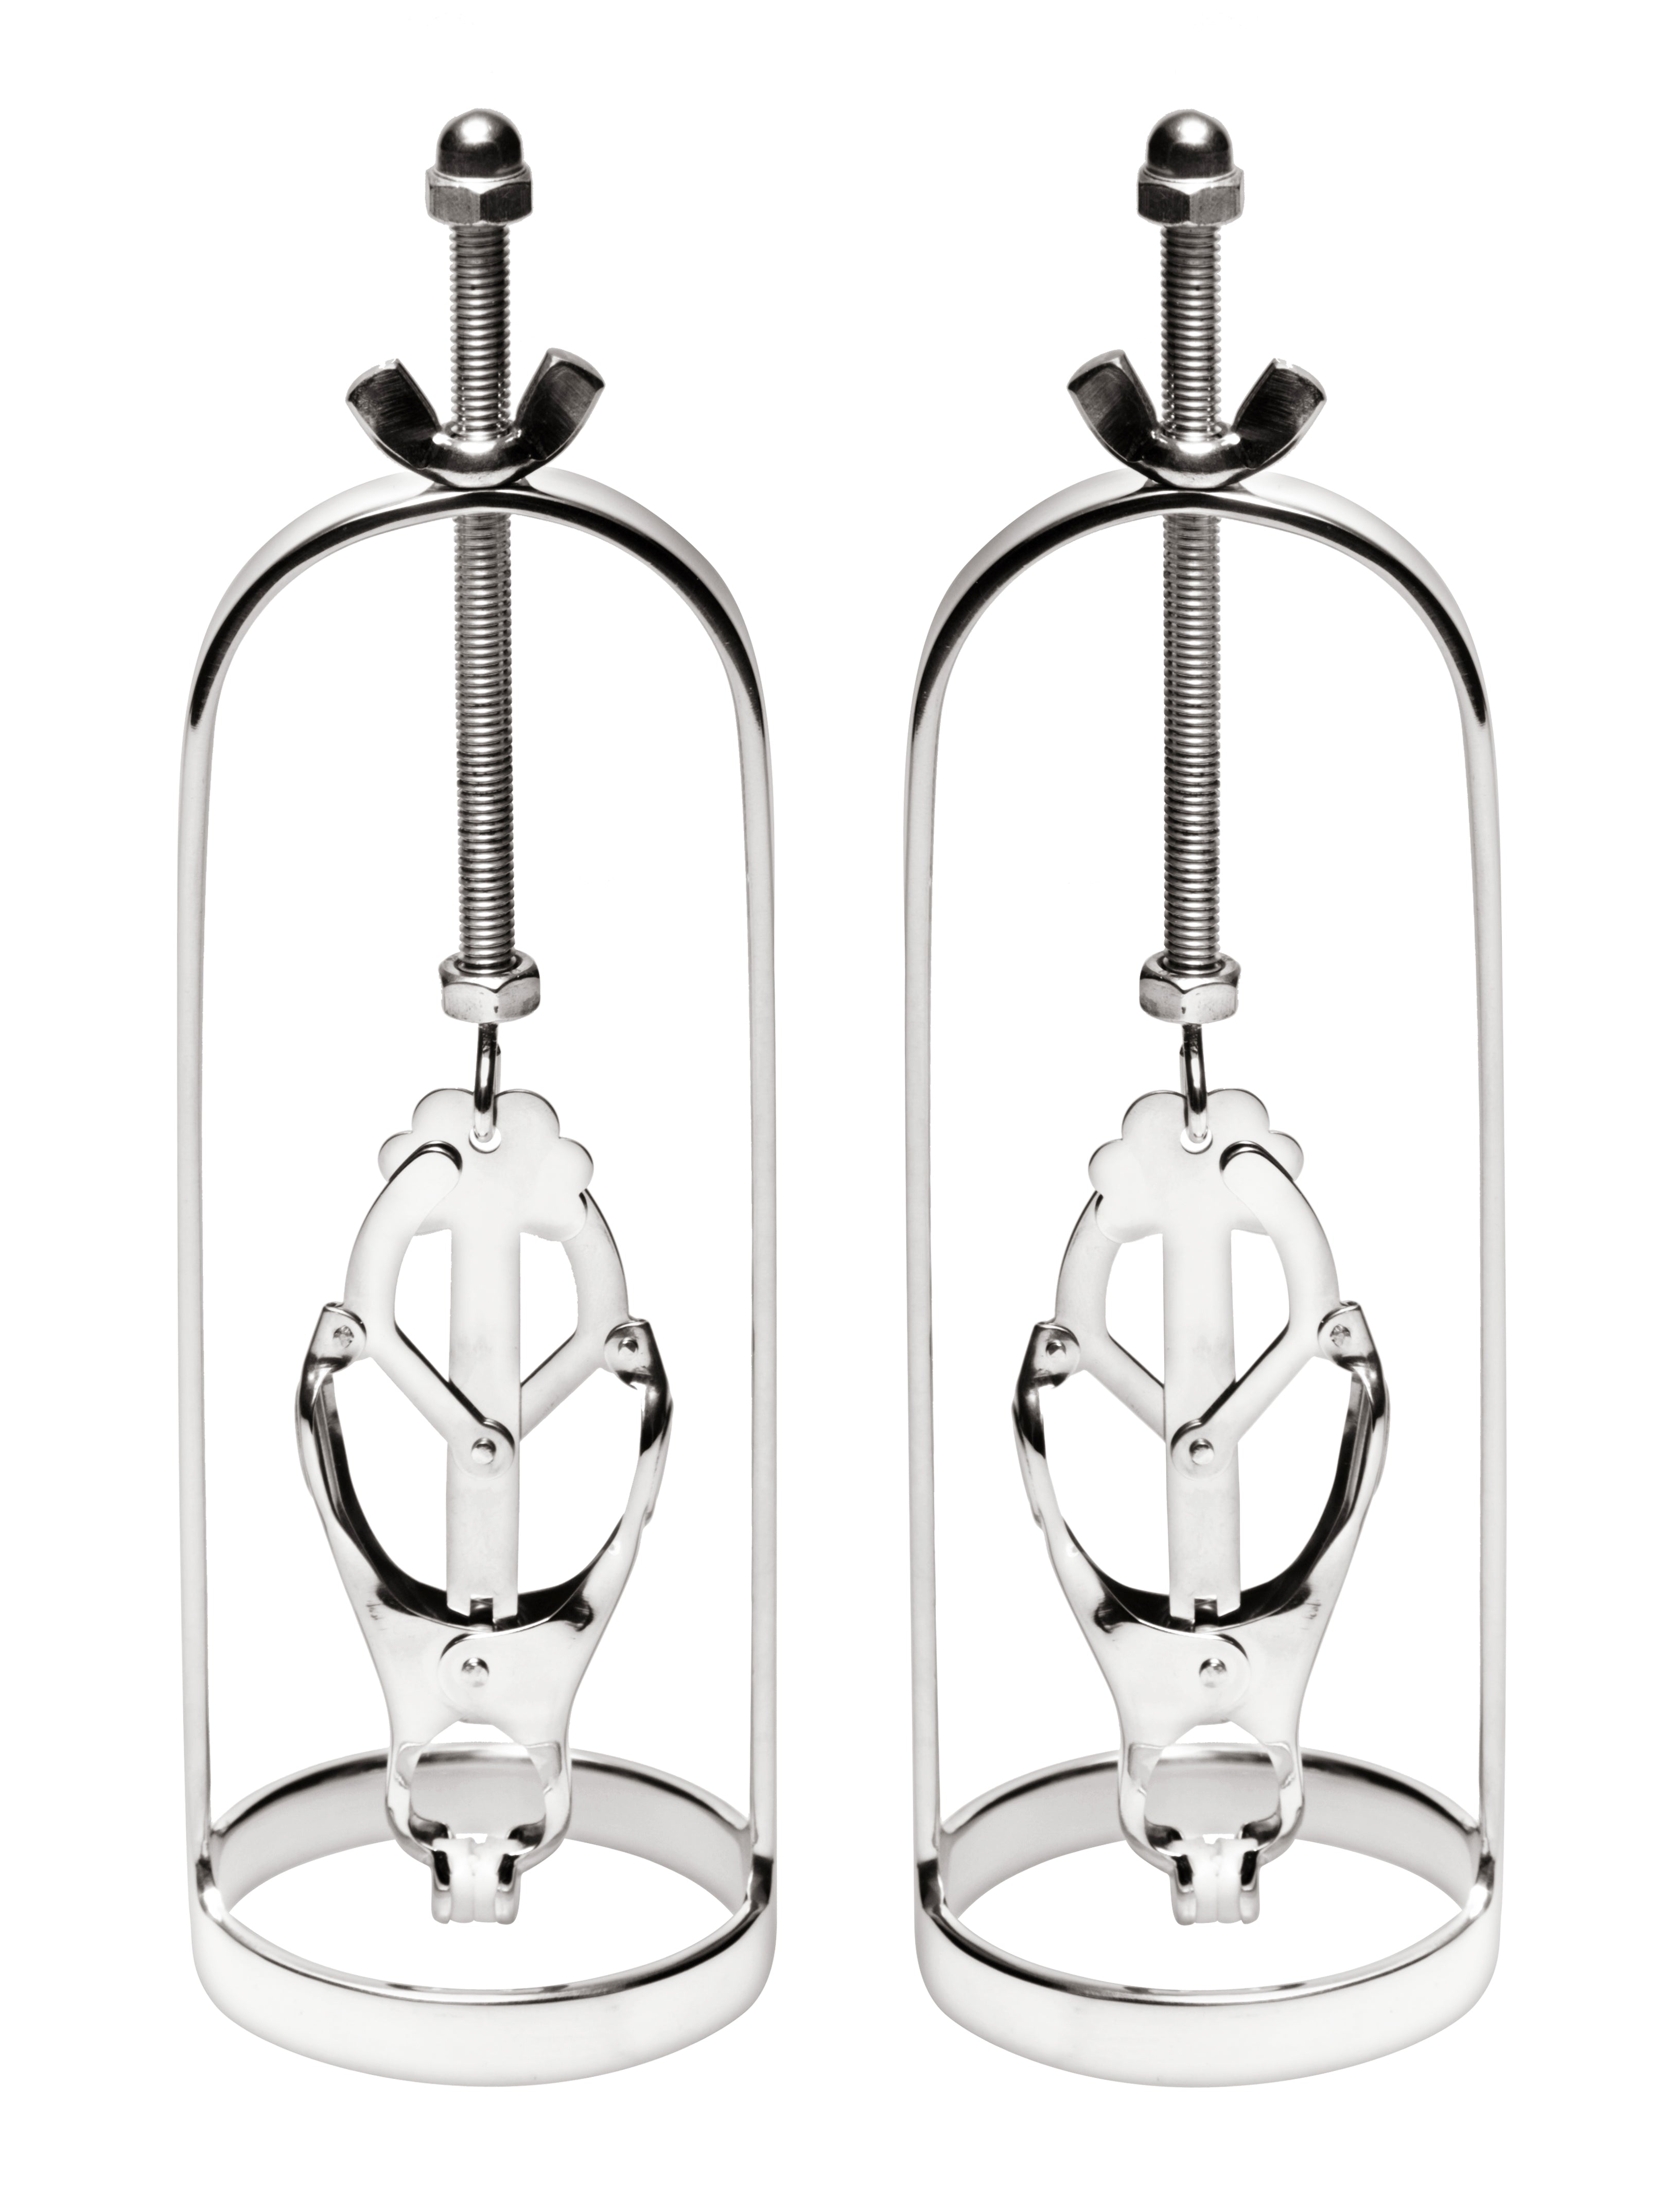 The Master Series - Stainless Steel Clover Clamp Nipple Stretcher - Silver